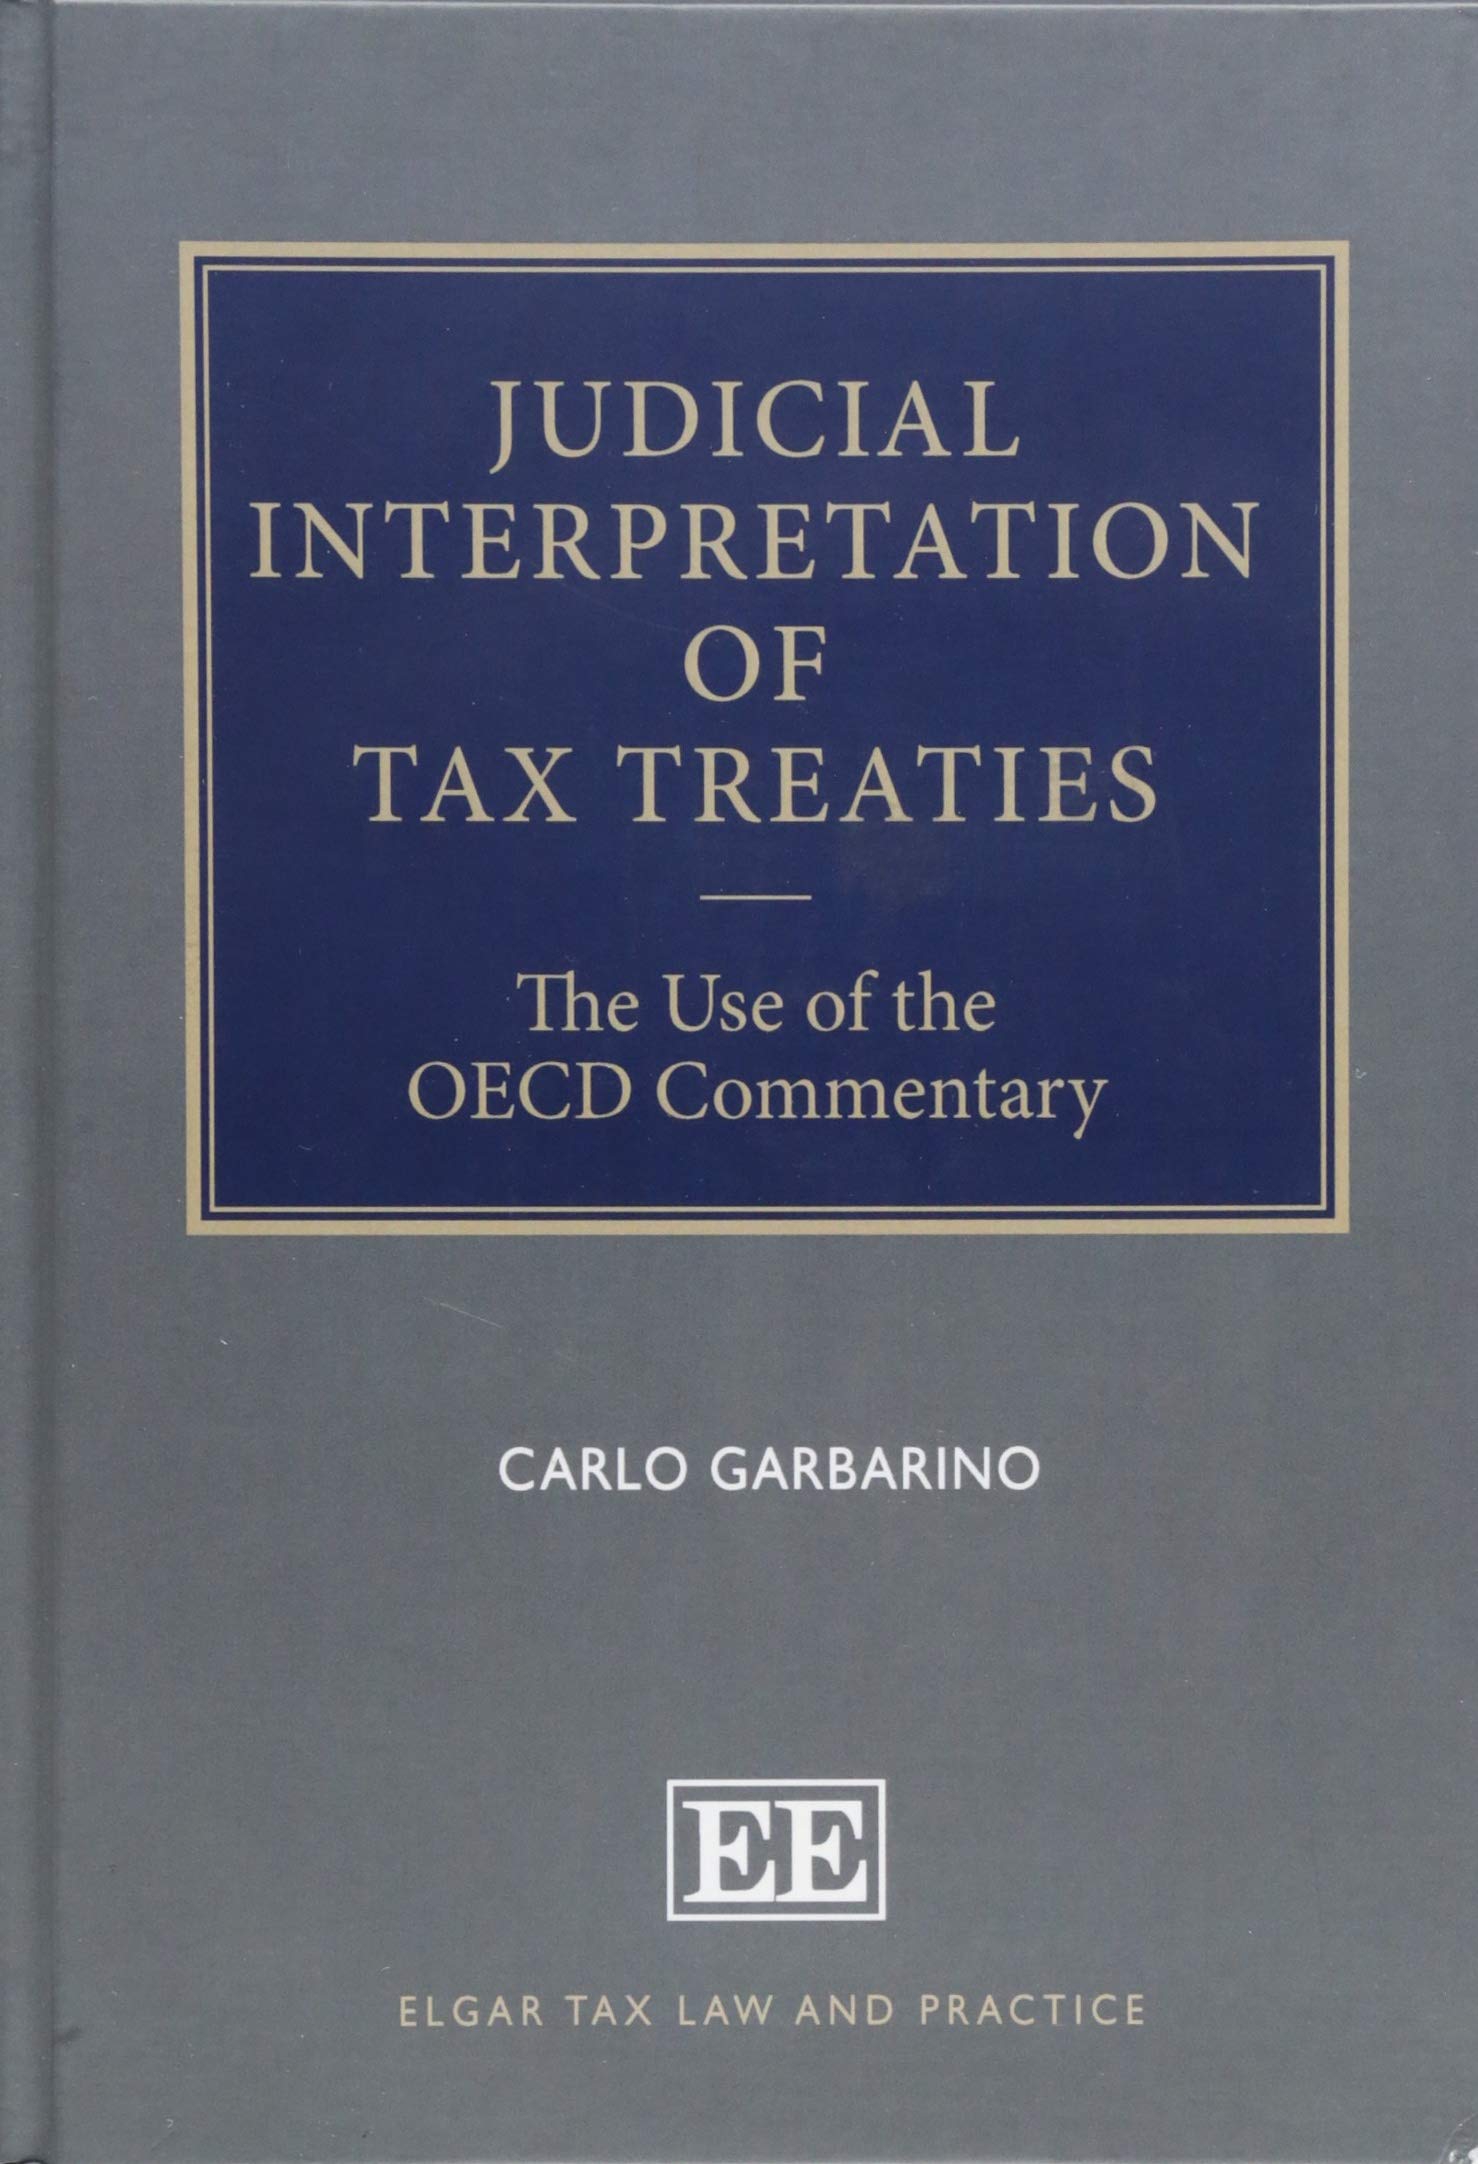 Judicial Interpretation of Tax Treaties: The Use of the OECD Commentary (Elgar Tax Law and Practice series)